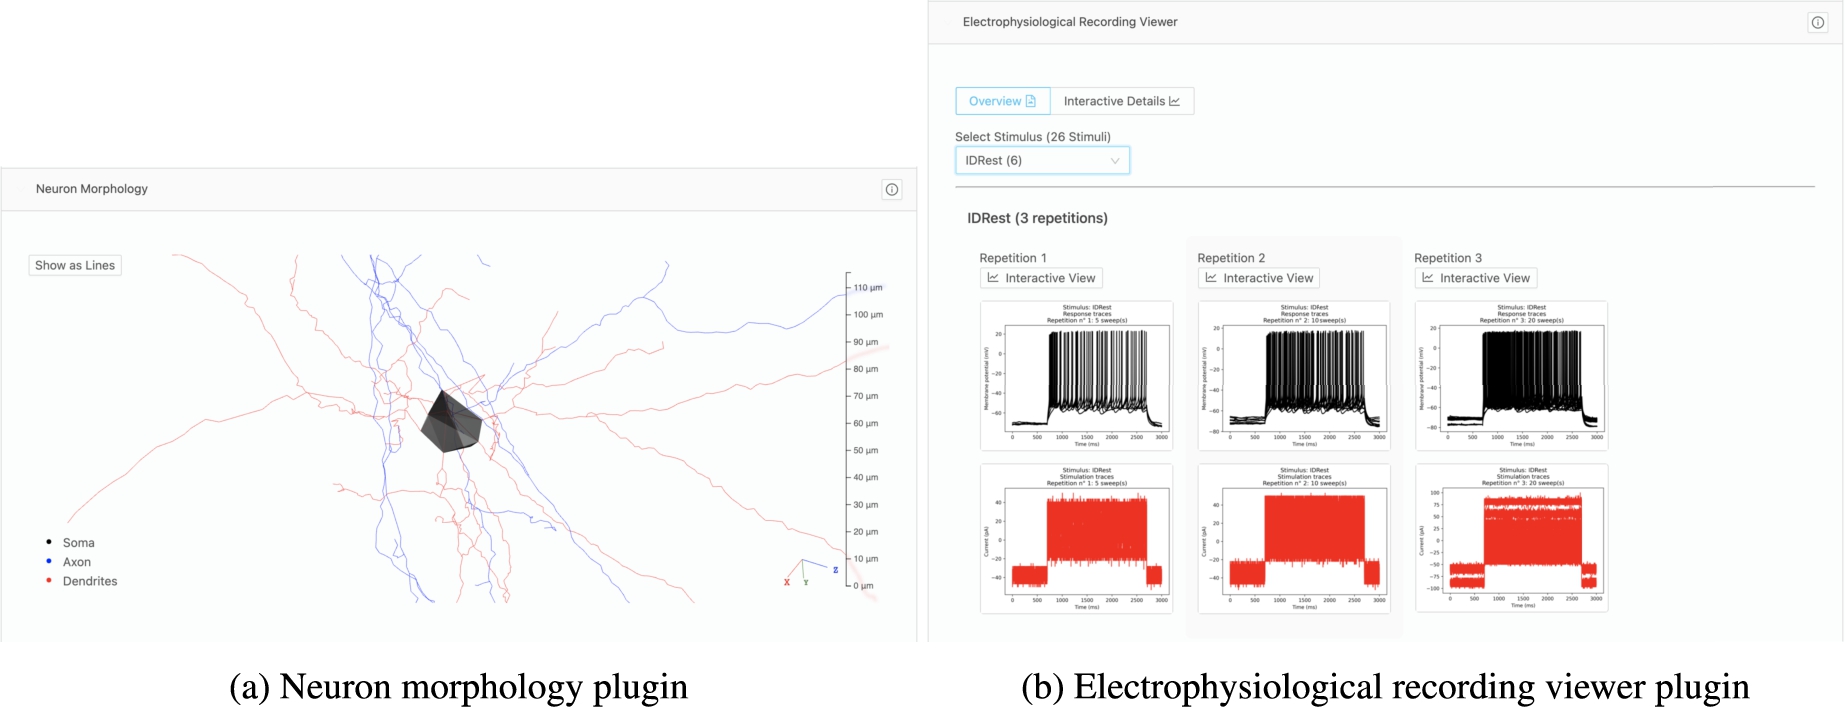 Plugins have been developed at Blue Brain Project for specific types of resources. Scientists can interactively explore 3D neuron morphologies through a plugin that reads and presents morphology data (a). Another plugin enables scientists to browse all static electrophysiology recordings for a specific neuron (b), with the ability to toggle to an interactive plot of the electrophysiology recordings.